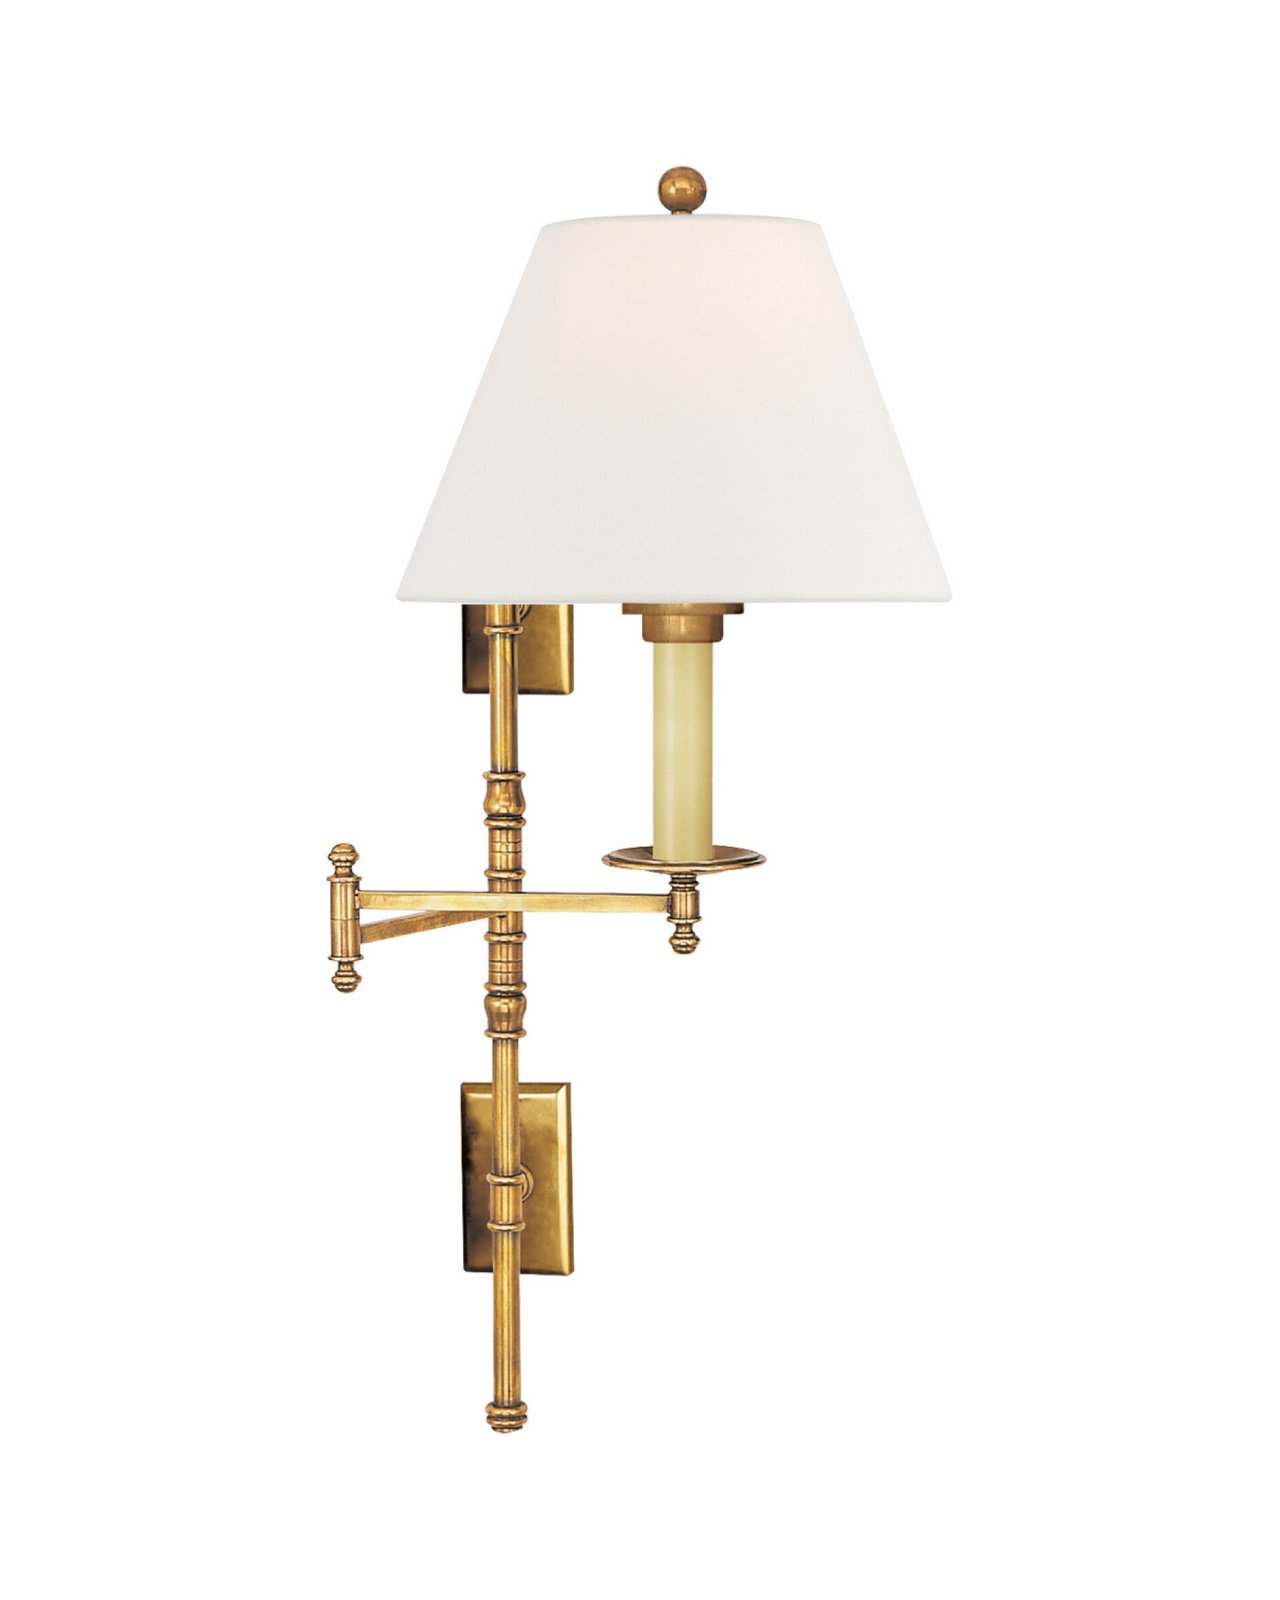 Dorchester Double Backplate Swing Arm Antique-Burnished Brass/Linen Shade